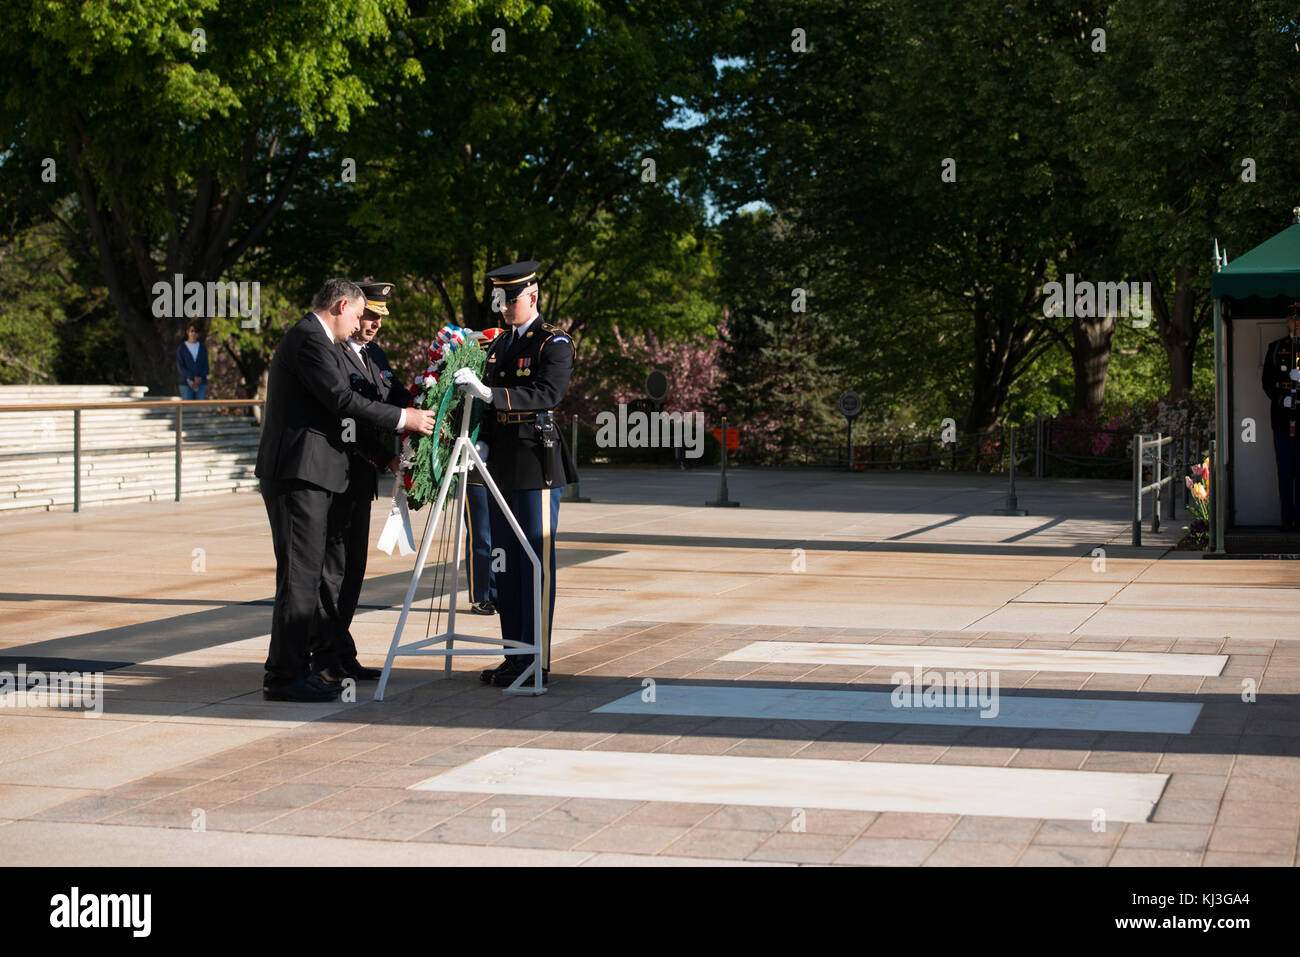 Minister of the Kosovo Security Force and Commander of the KSF lay a wreath at the Tomb of the Unknown Soldier in Arlington National Cemetery (26269126230) Stock Photo